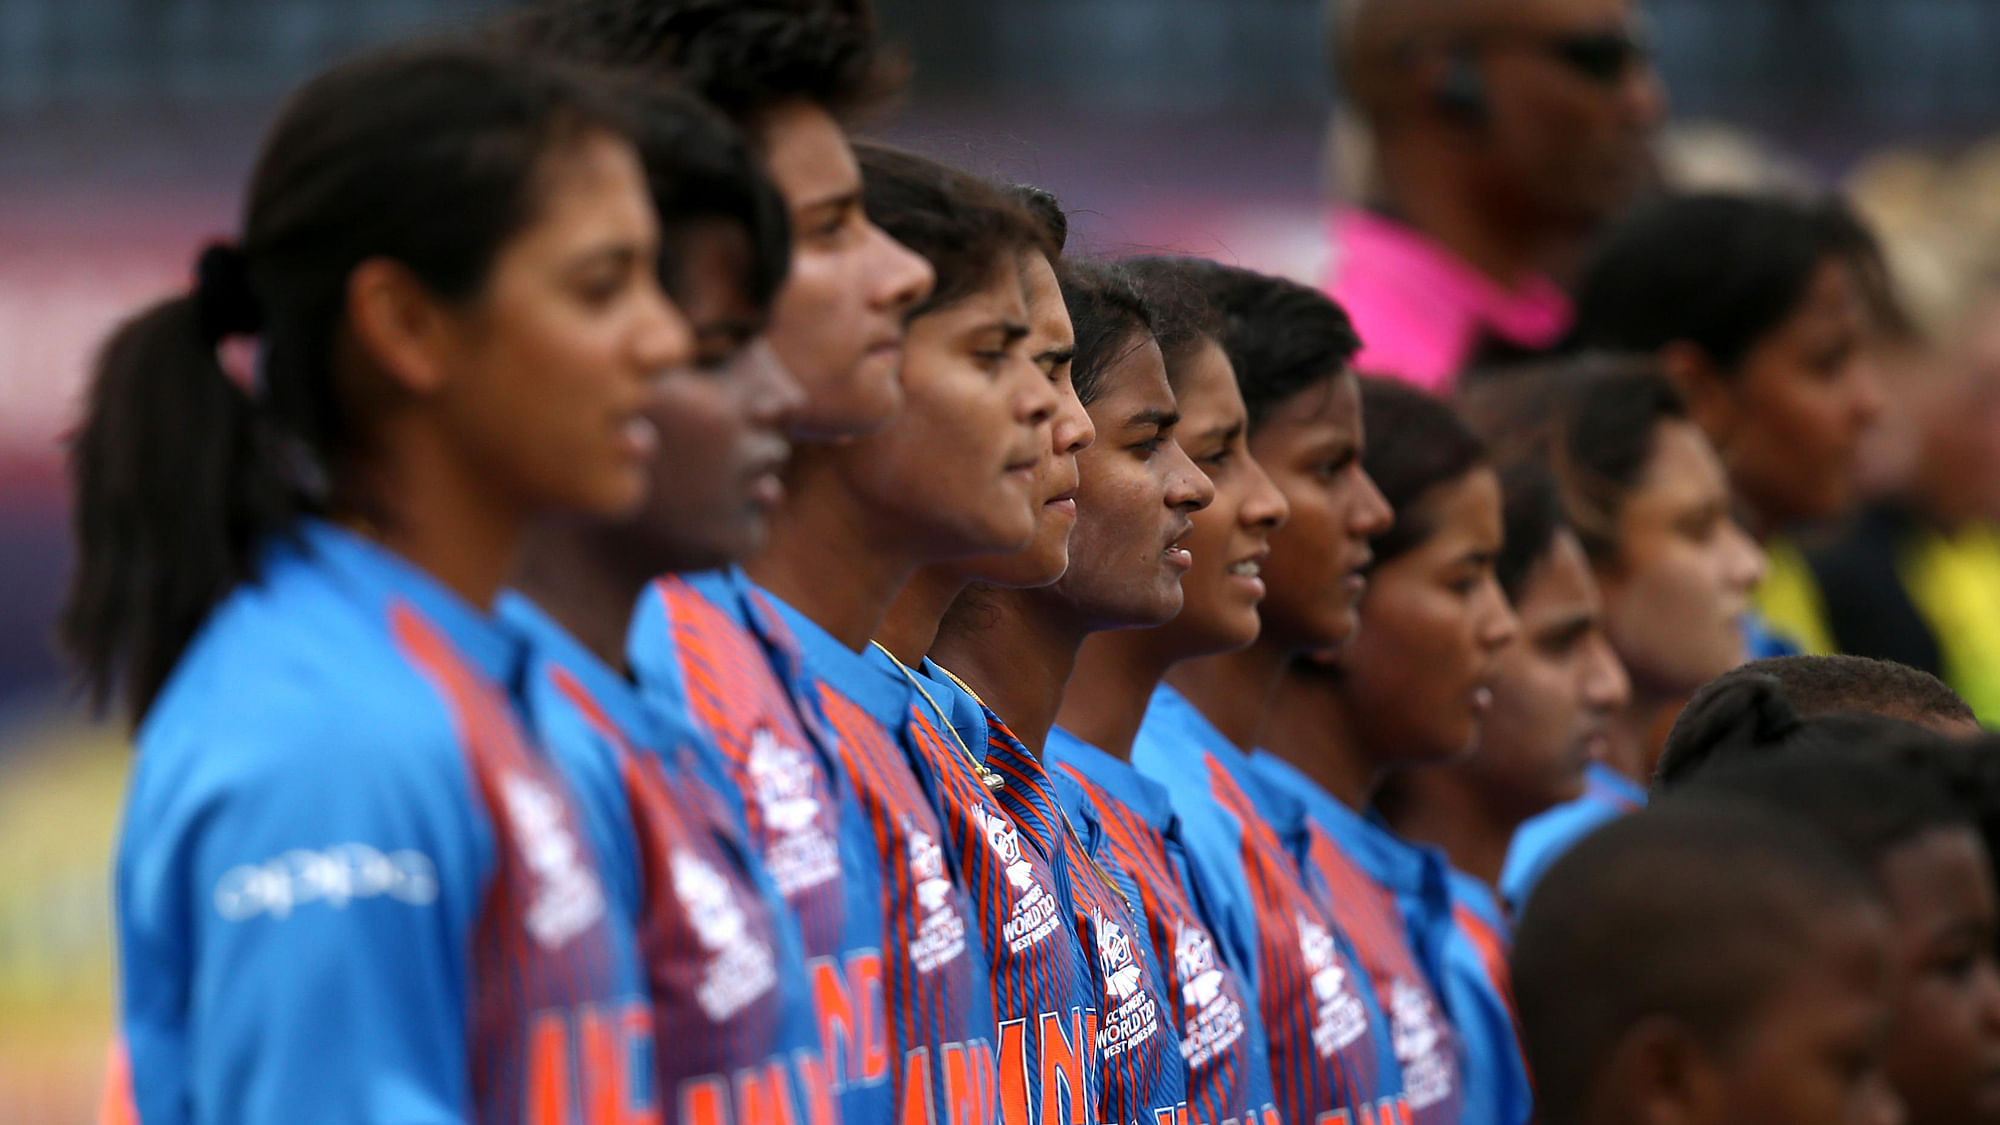 The Indian women’s cricket team will play England on Friday morning for a spot in the final of the ICC Women’s World T20.